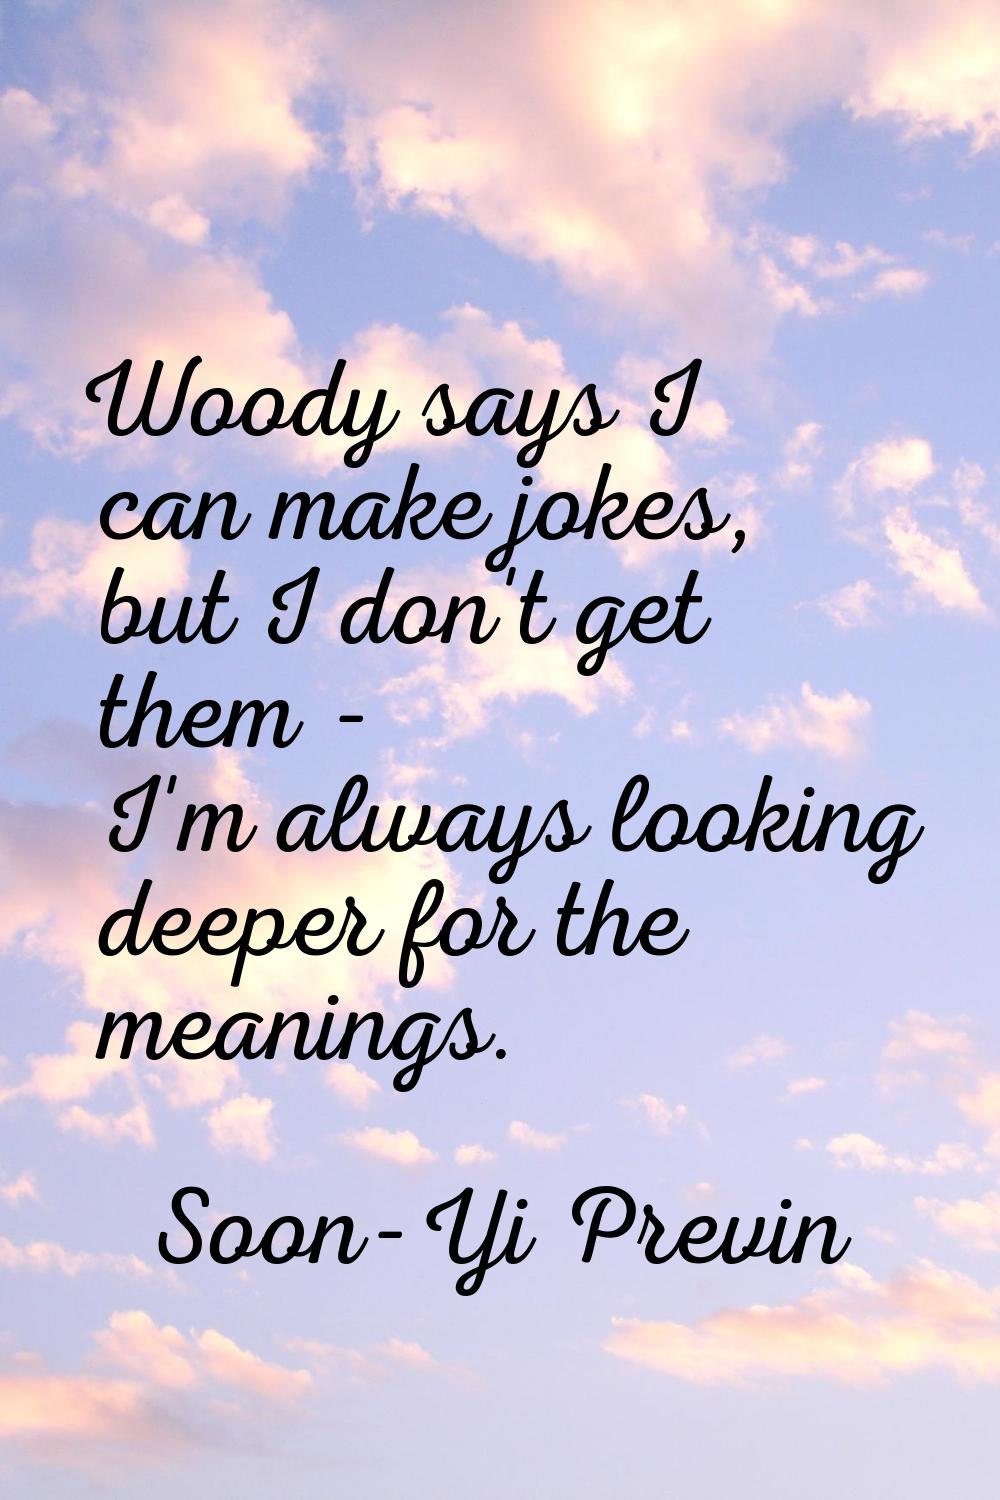 Woody says I can make jokes, but I don't get them - I'm always looking deeper for the meanings.